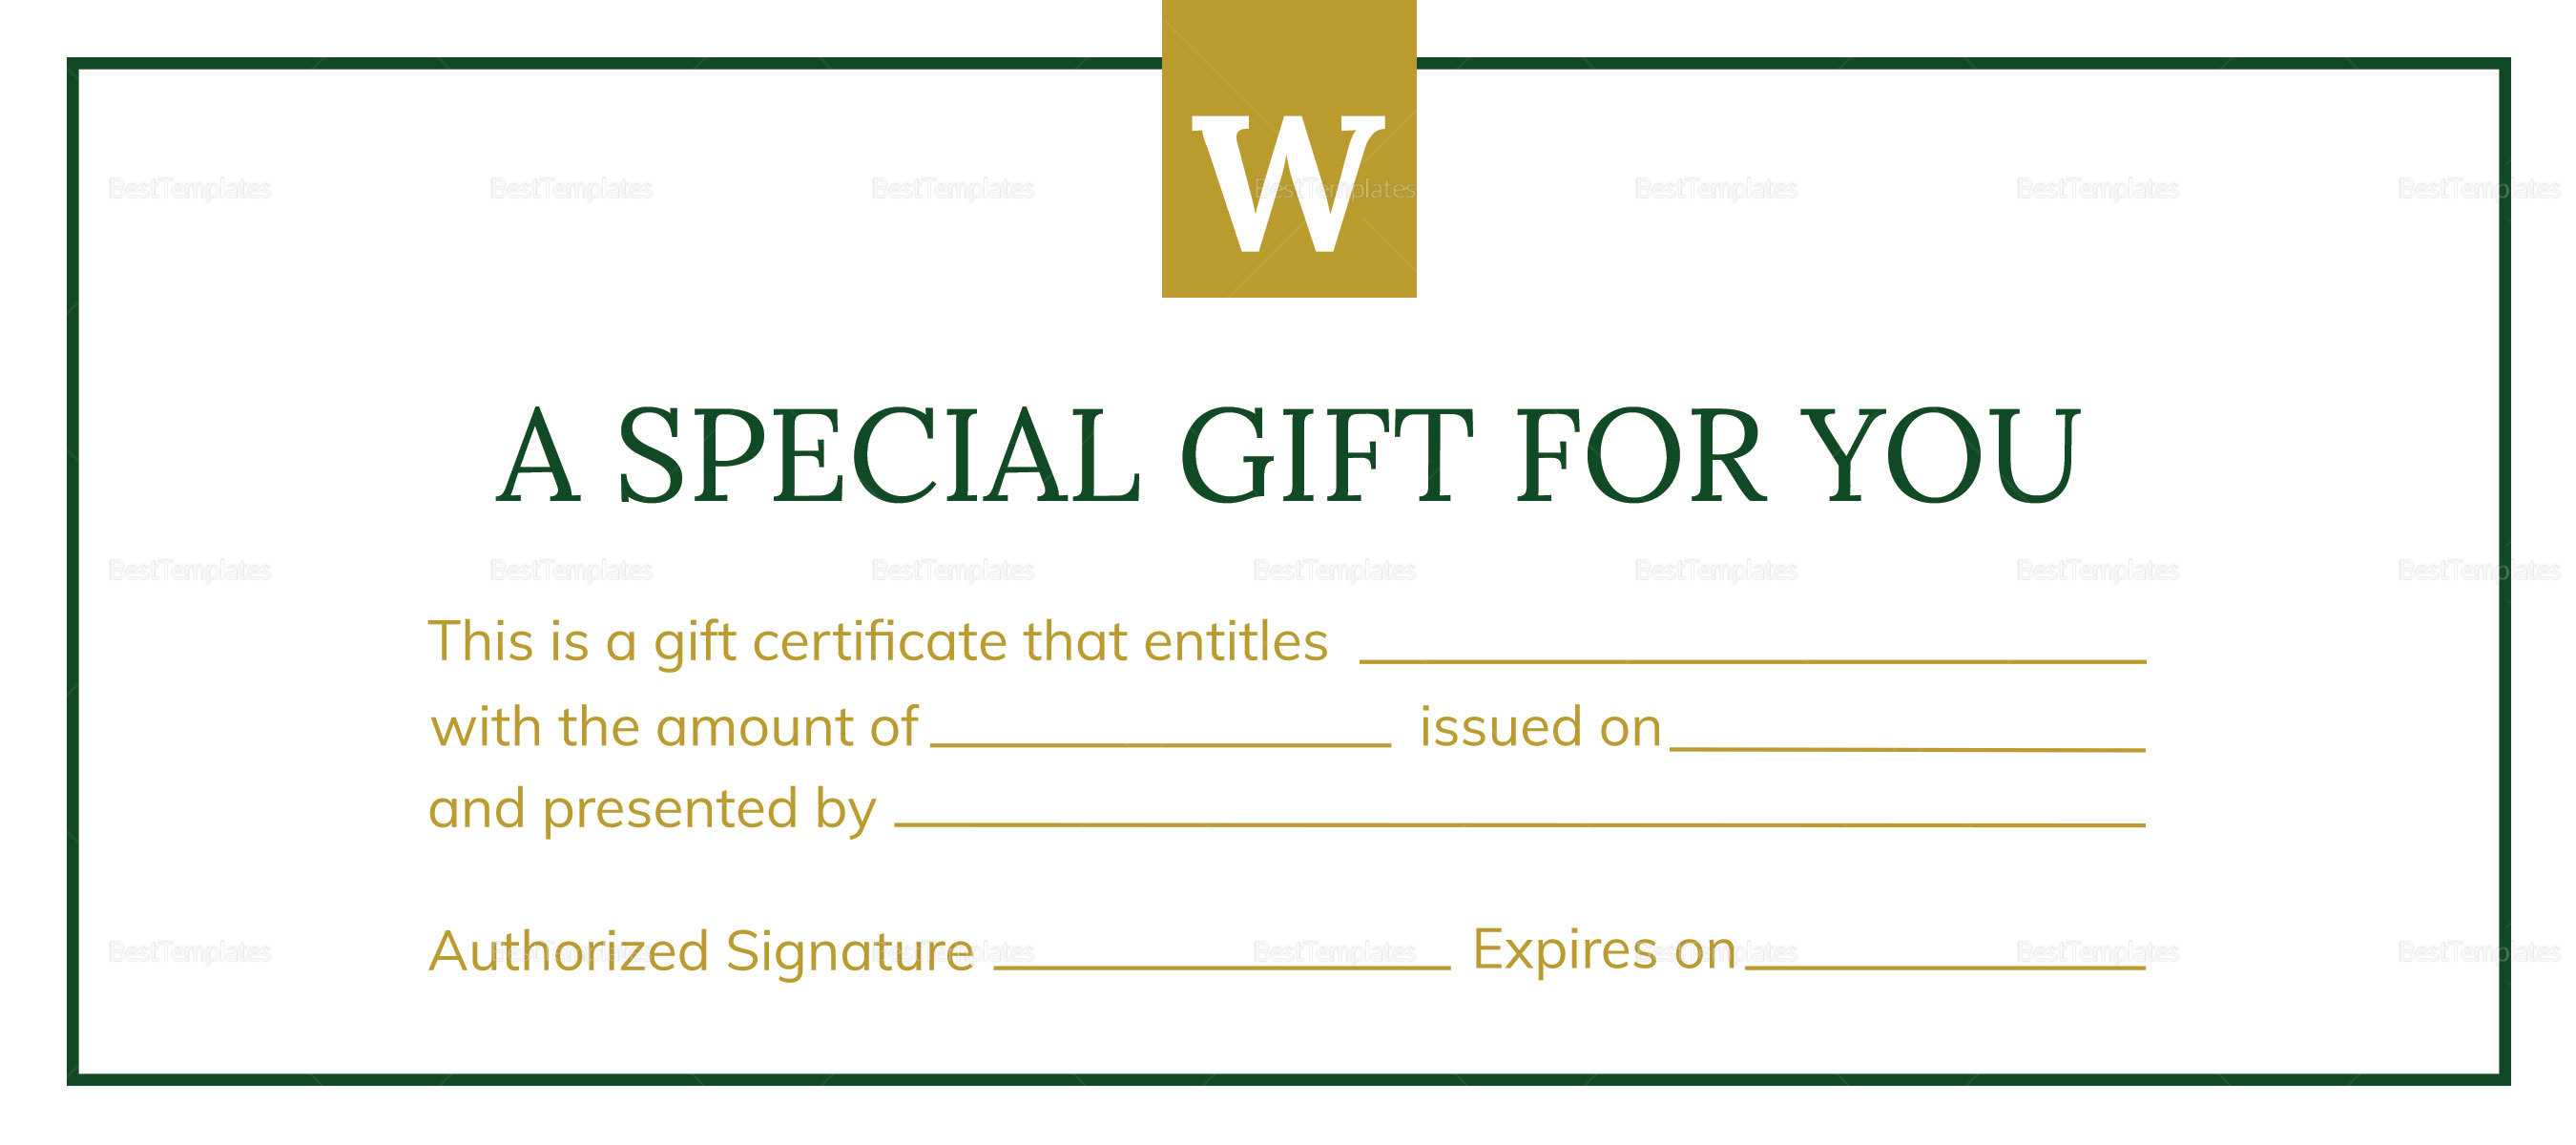 Hotel Gift Certificate Template Inside Gift Certificate Template Indesign